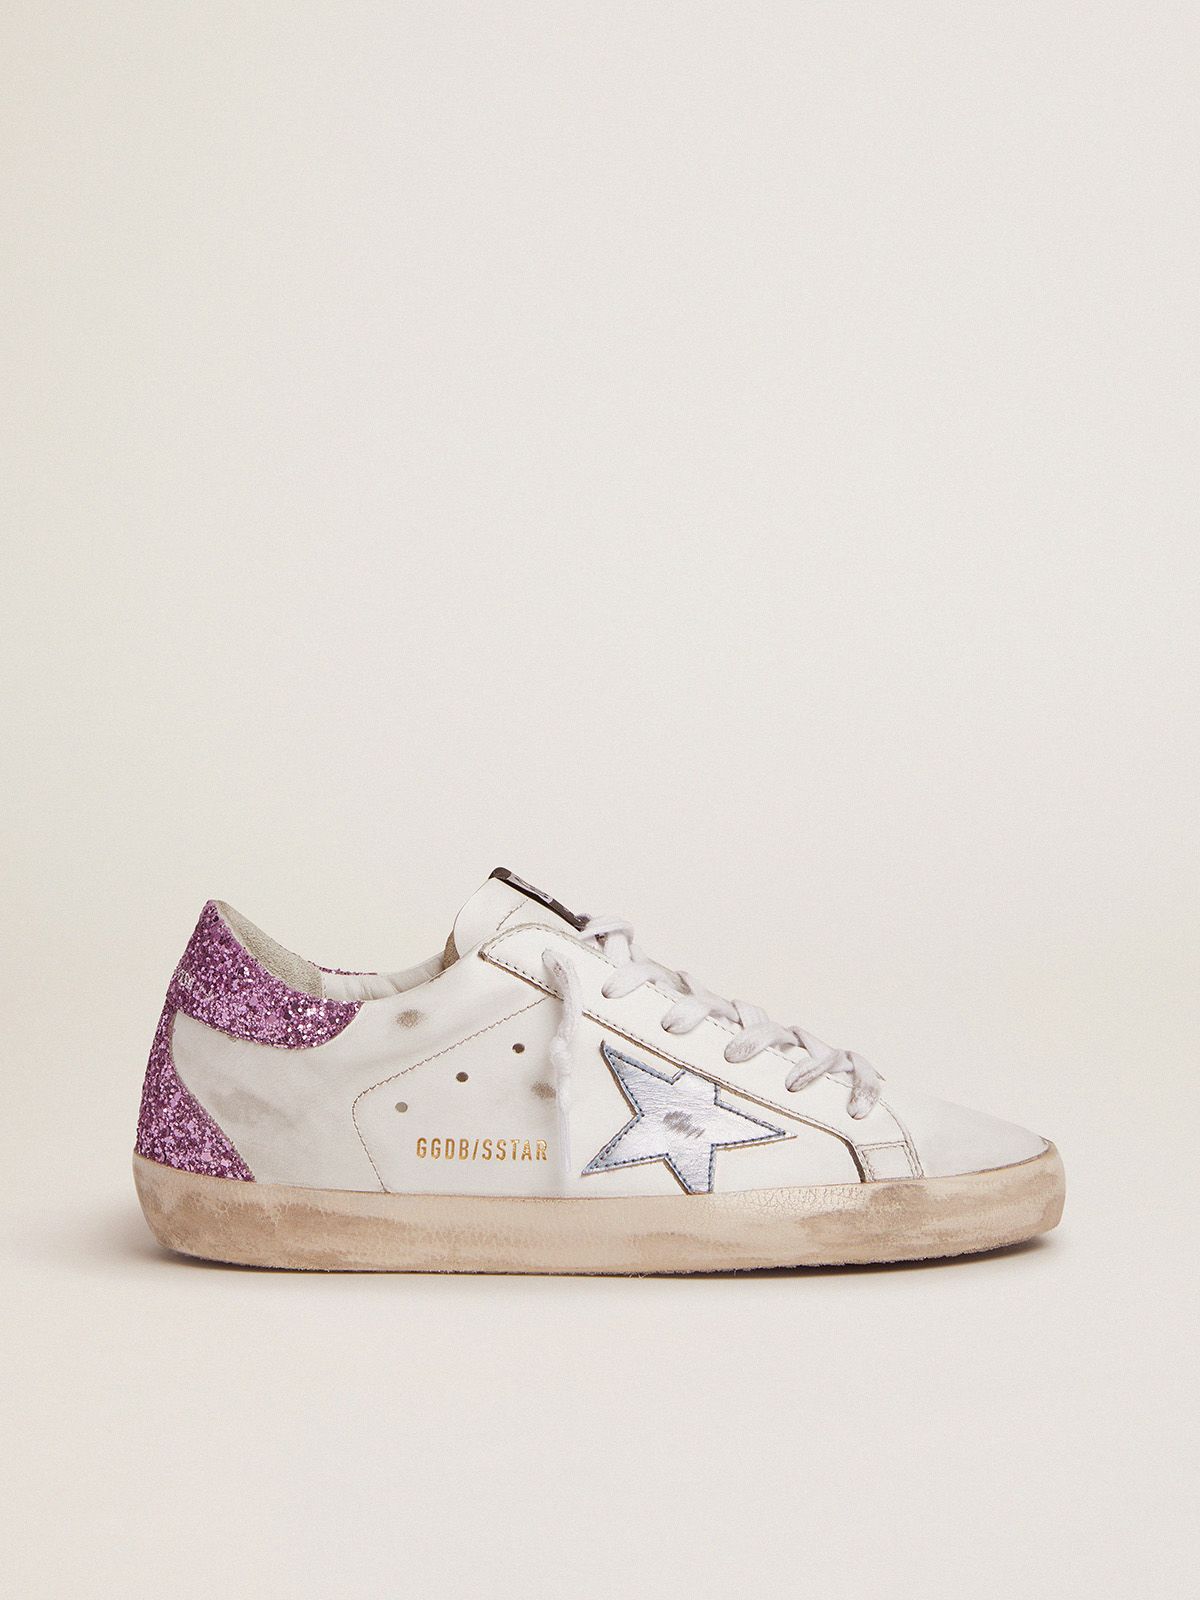 golden goose heel star lavender sneakers glitter light-blue Super-Star leather tab metallic and with